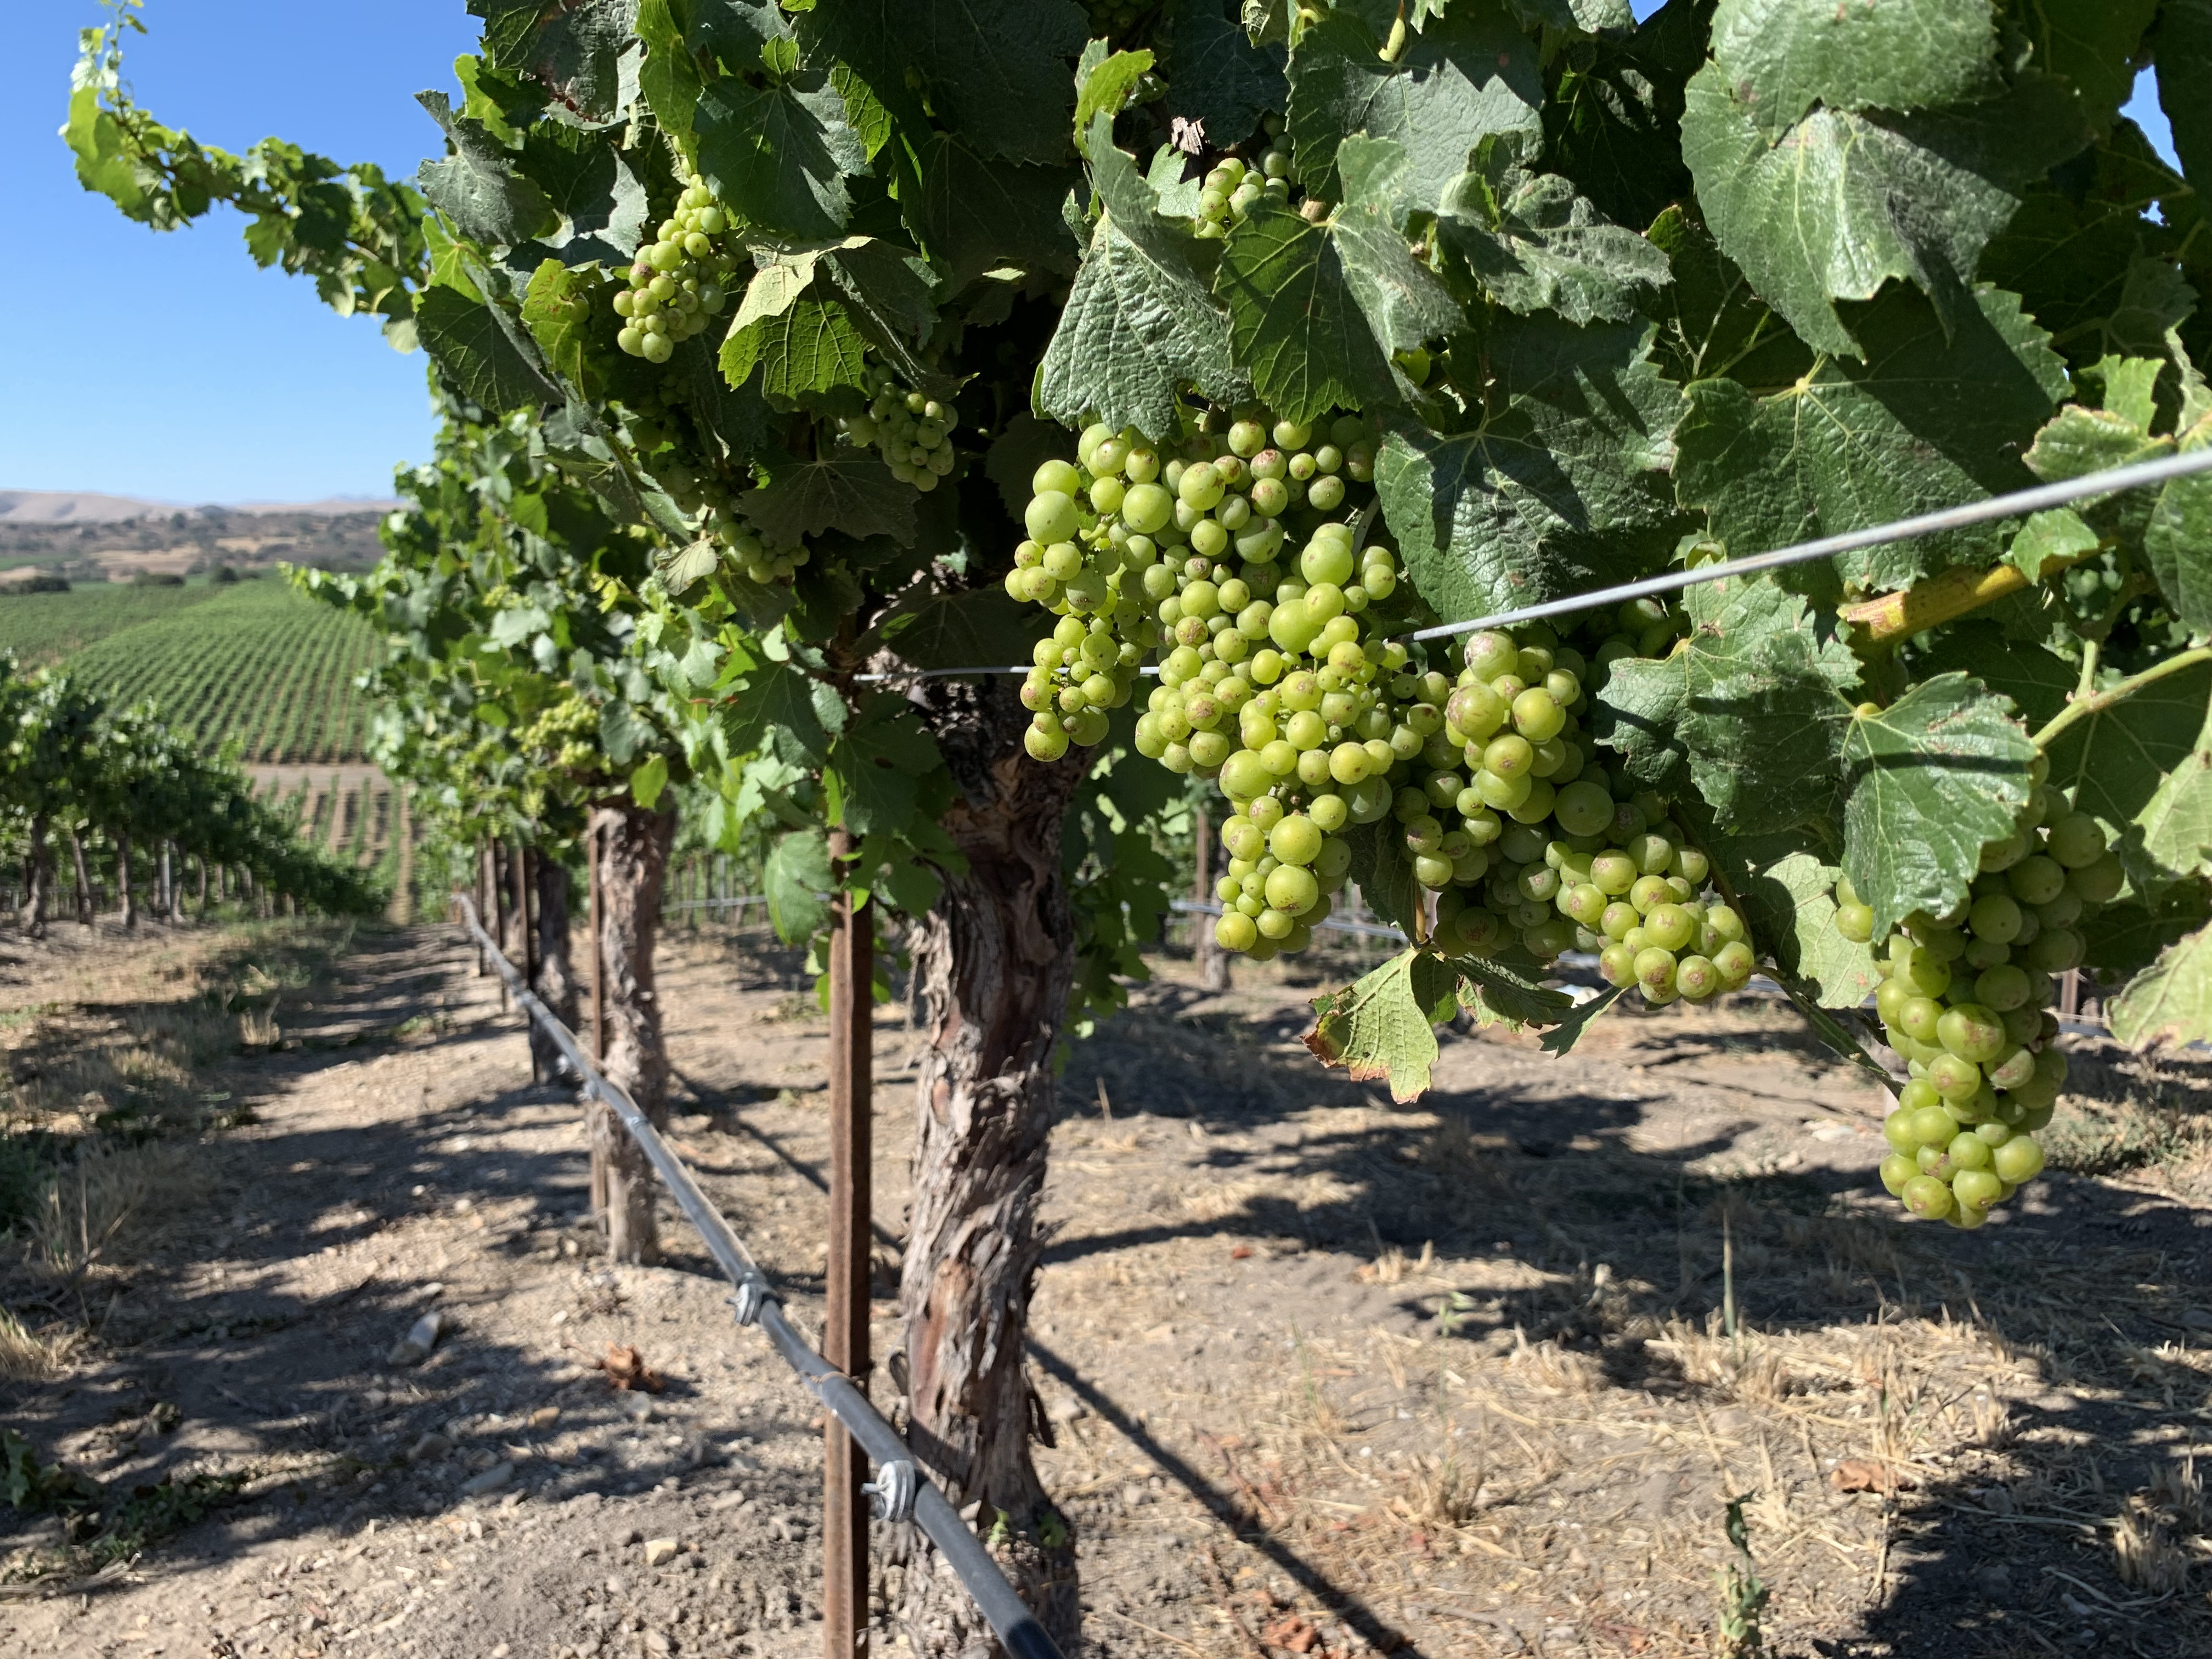 Grapes on the vine in a California vineyard.